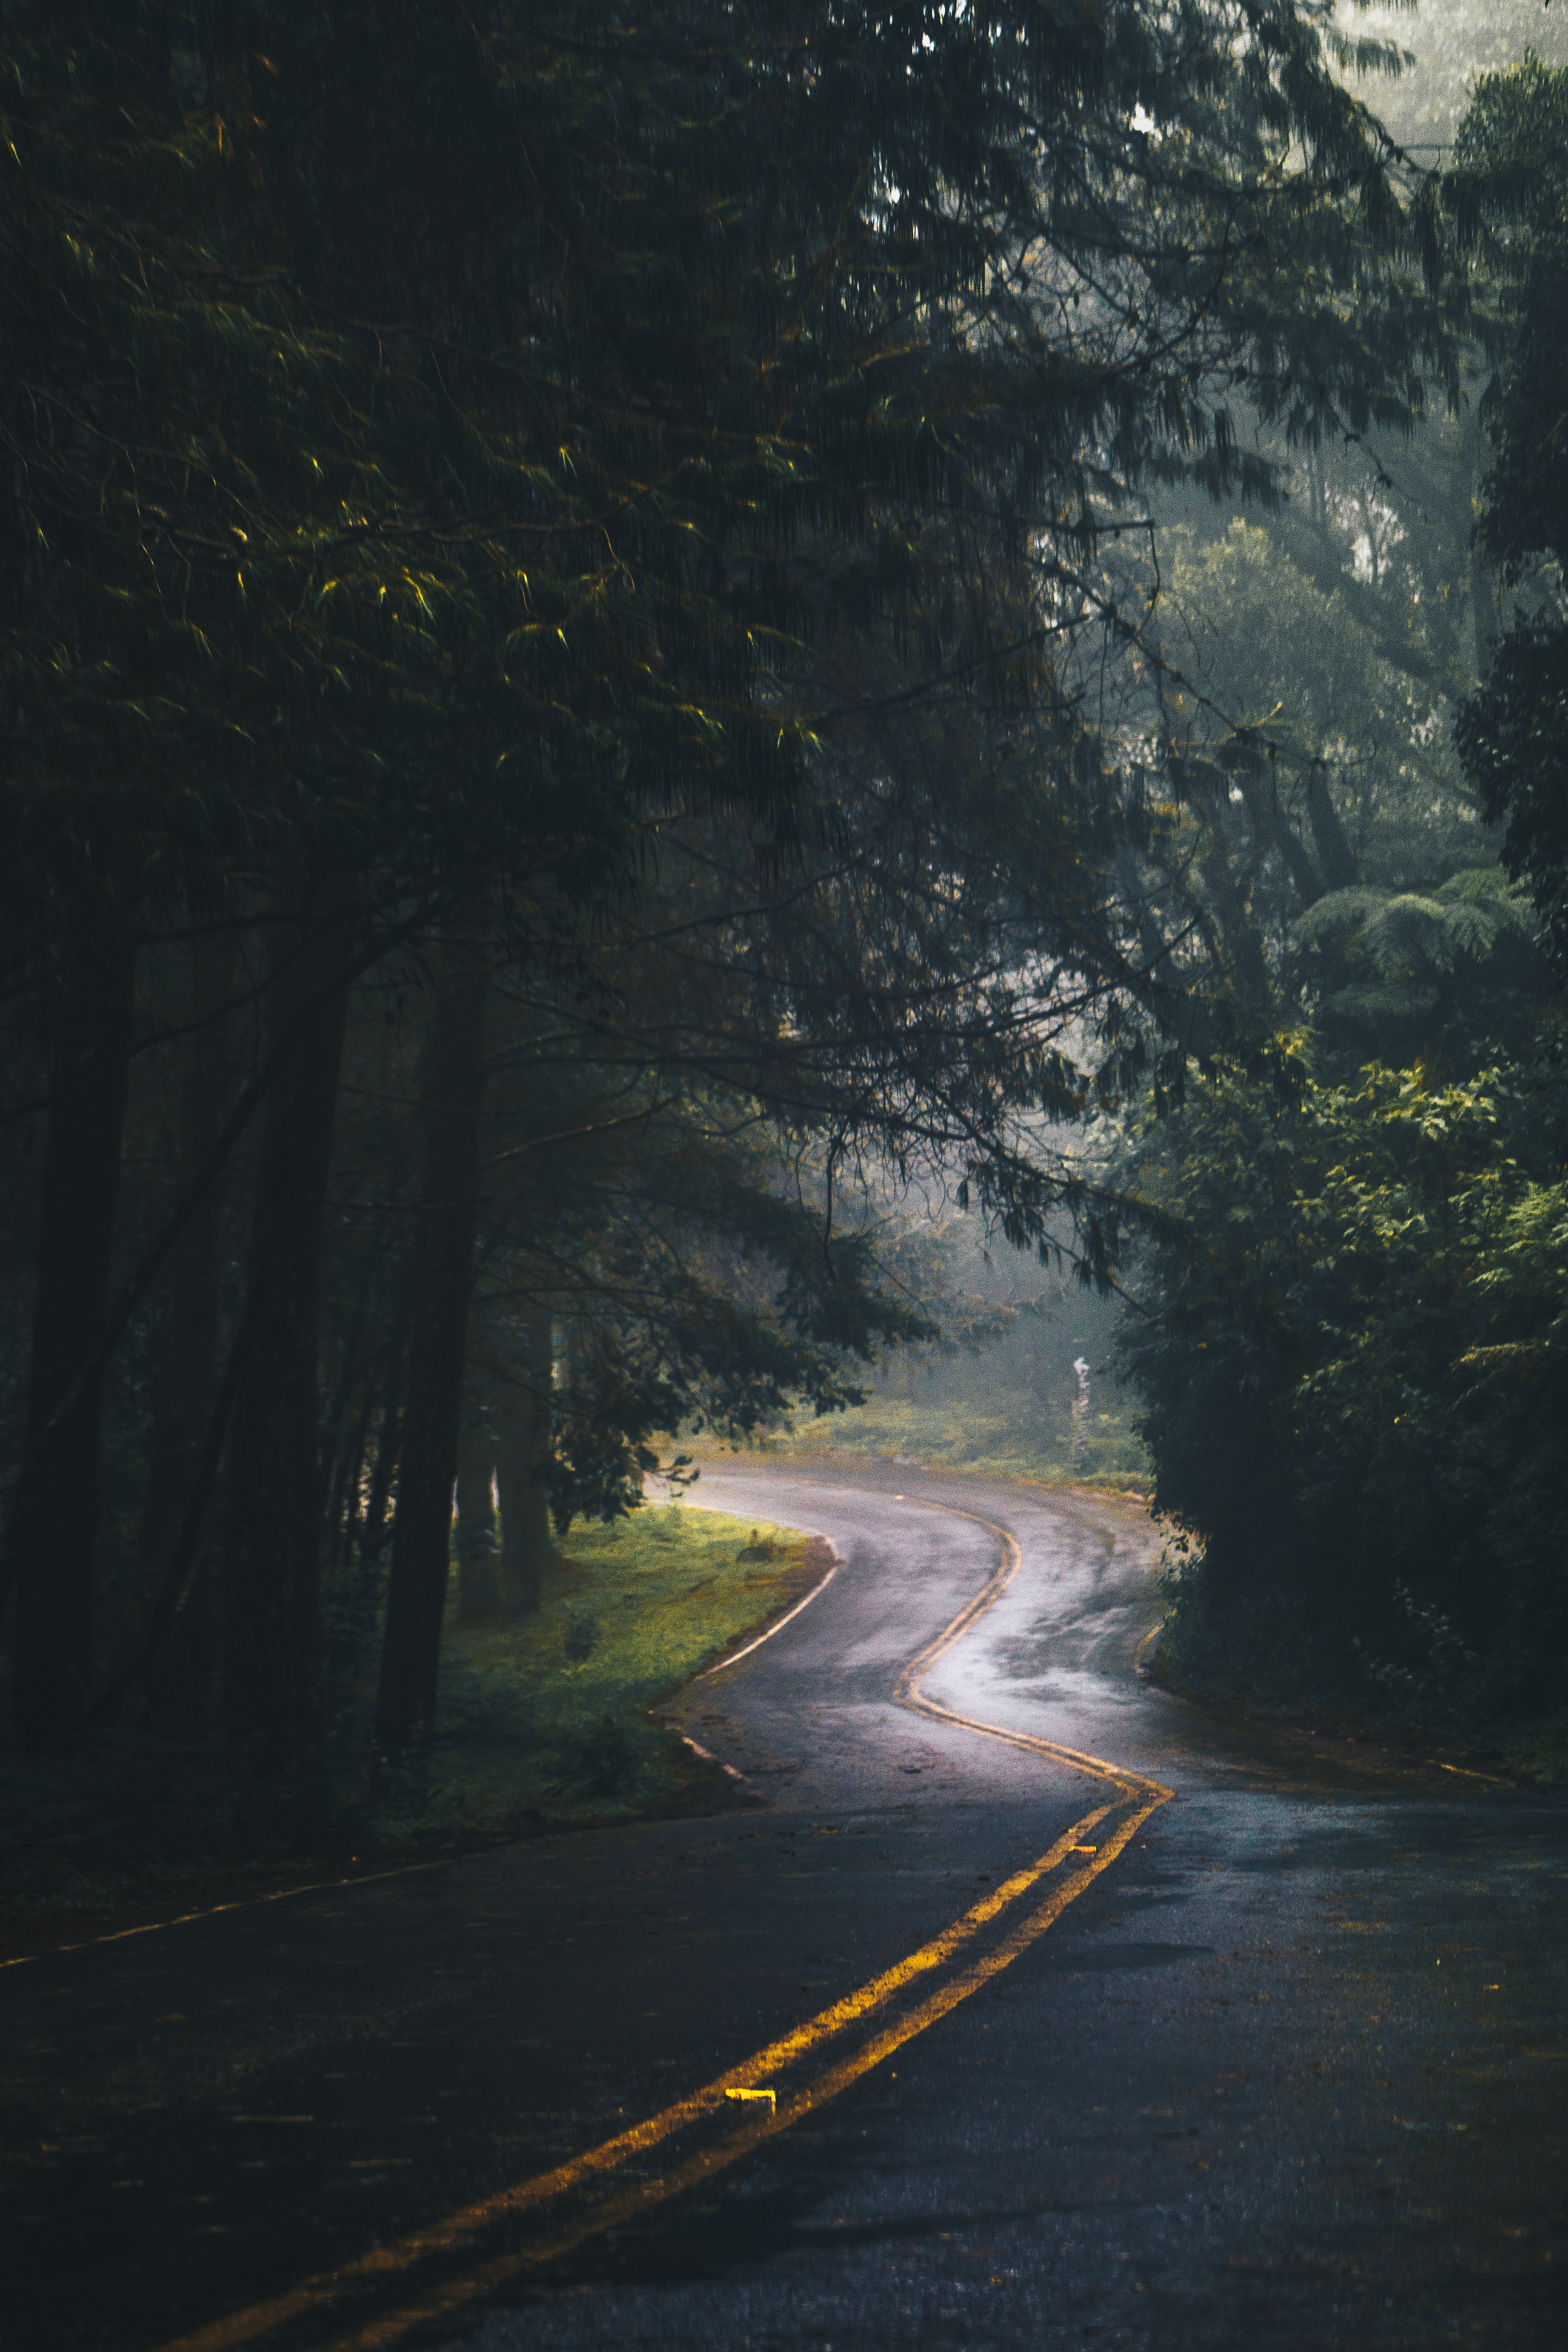 Landscape photography of winding road in a forest